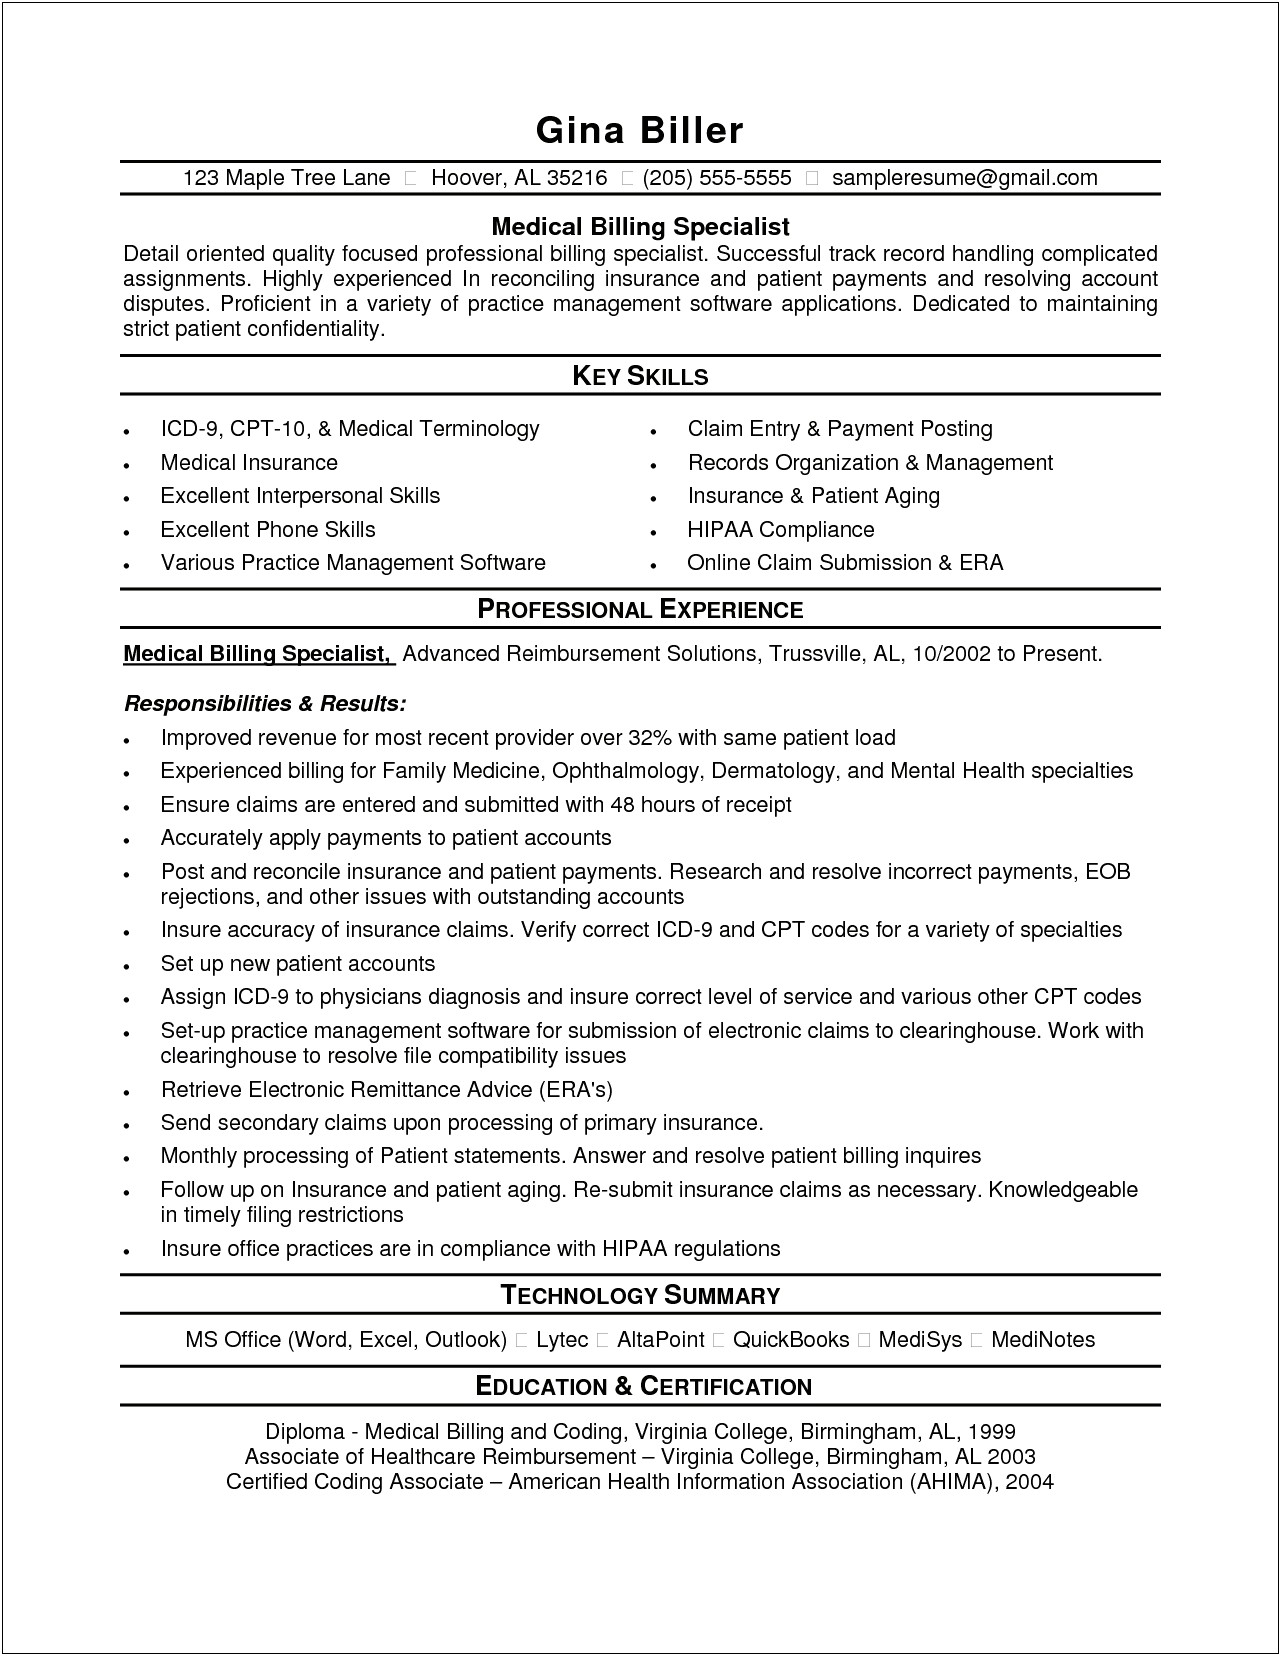 Resume Examples Medical Billing And Coding